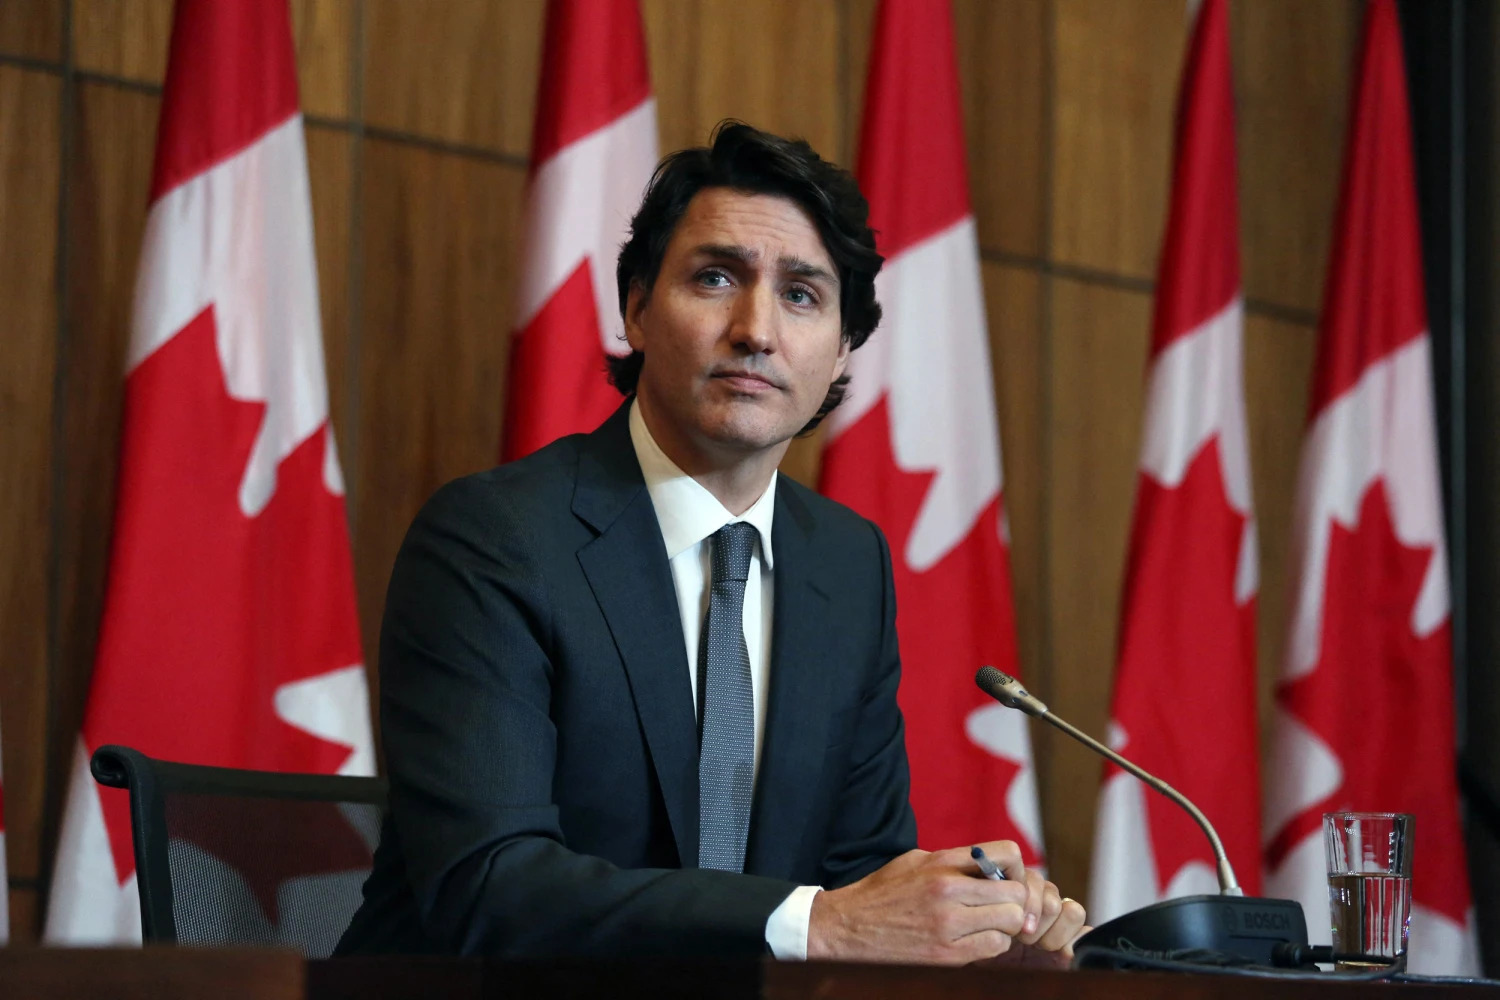 Canadian Prime Minister Justin Trudeau said politicians may be forced to “rethink the freedoms that we’ve had as parliamentarians” after Deputy PM Chrystia Freeland was verbally harassed in Alberta.